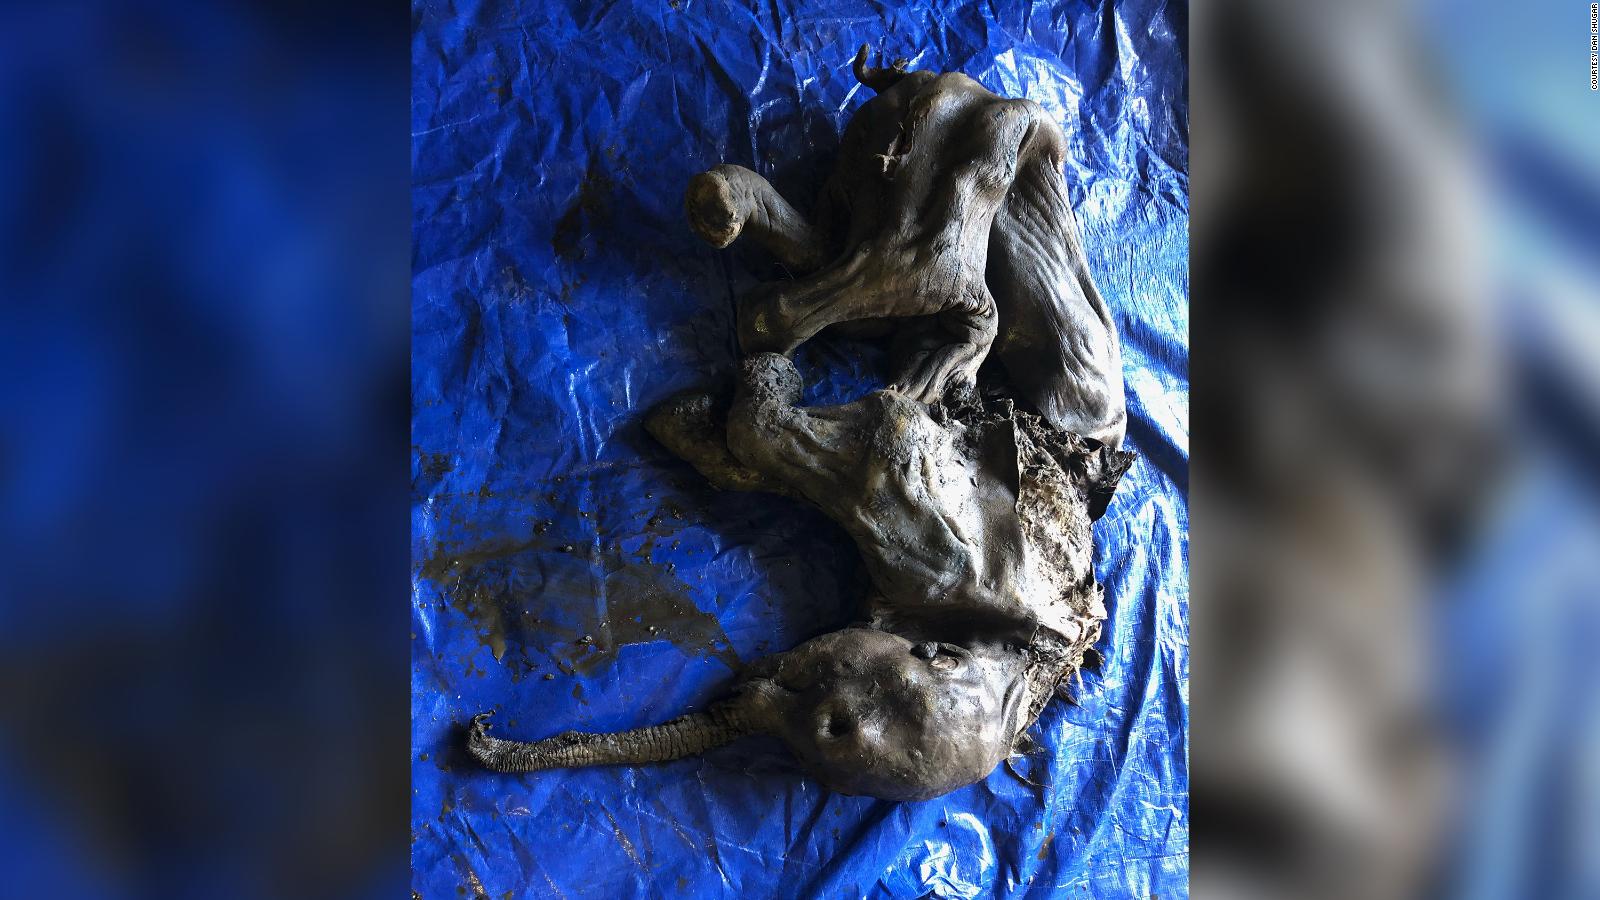 Nearly complete baby mummified woolly mammoth discovered in Canada